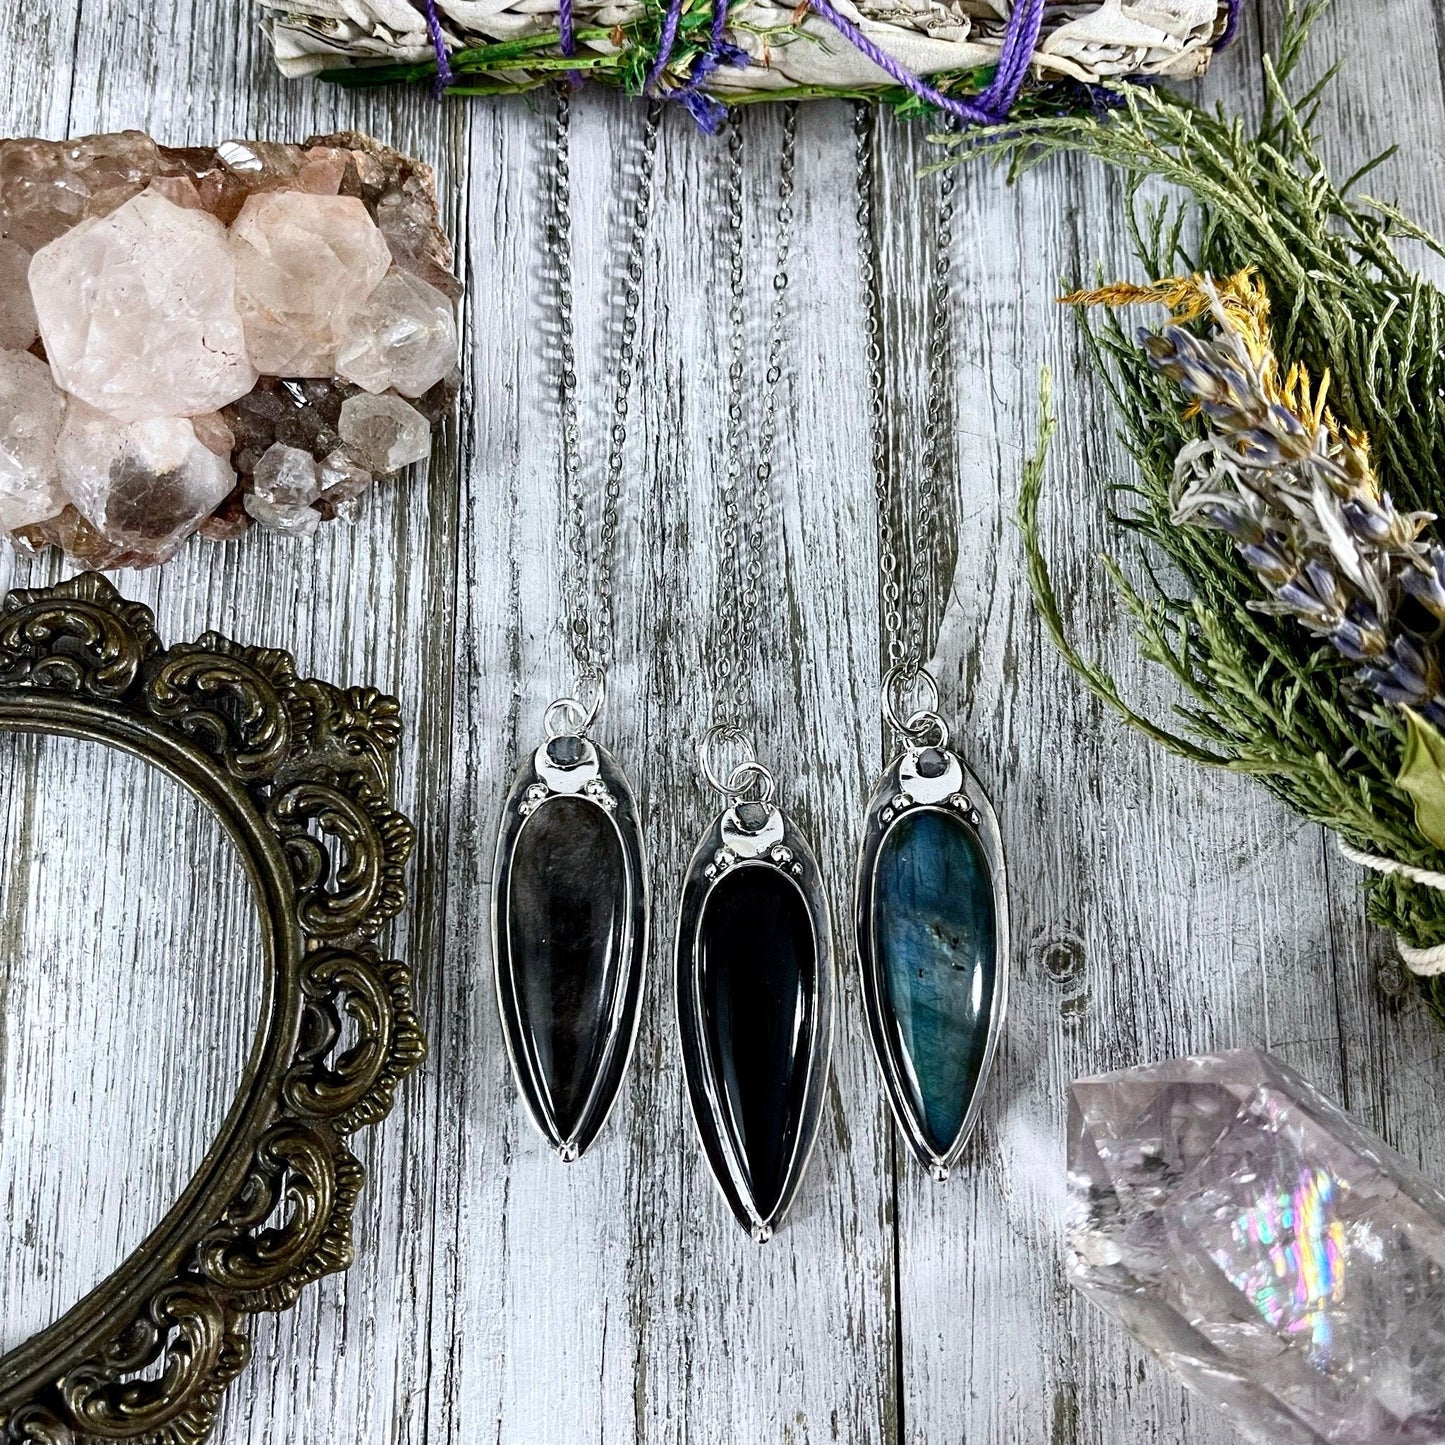 Big Gothic Necklace, Big Silver Necklace, Big Stone Necklace, Bohemian Jewelry, Crystal Necklace, Crystal Necklaces, Crystal Pendant, Etsy Id 1078432657, Foxlark- Necklaces, Gothic Jewelry, Jewelry, Moon Necklace, Necklaces, Wholesale